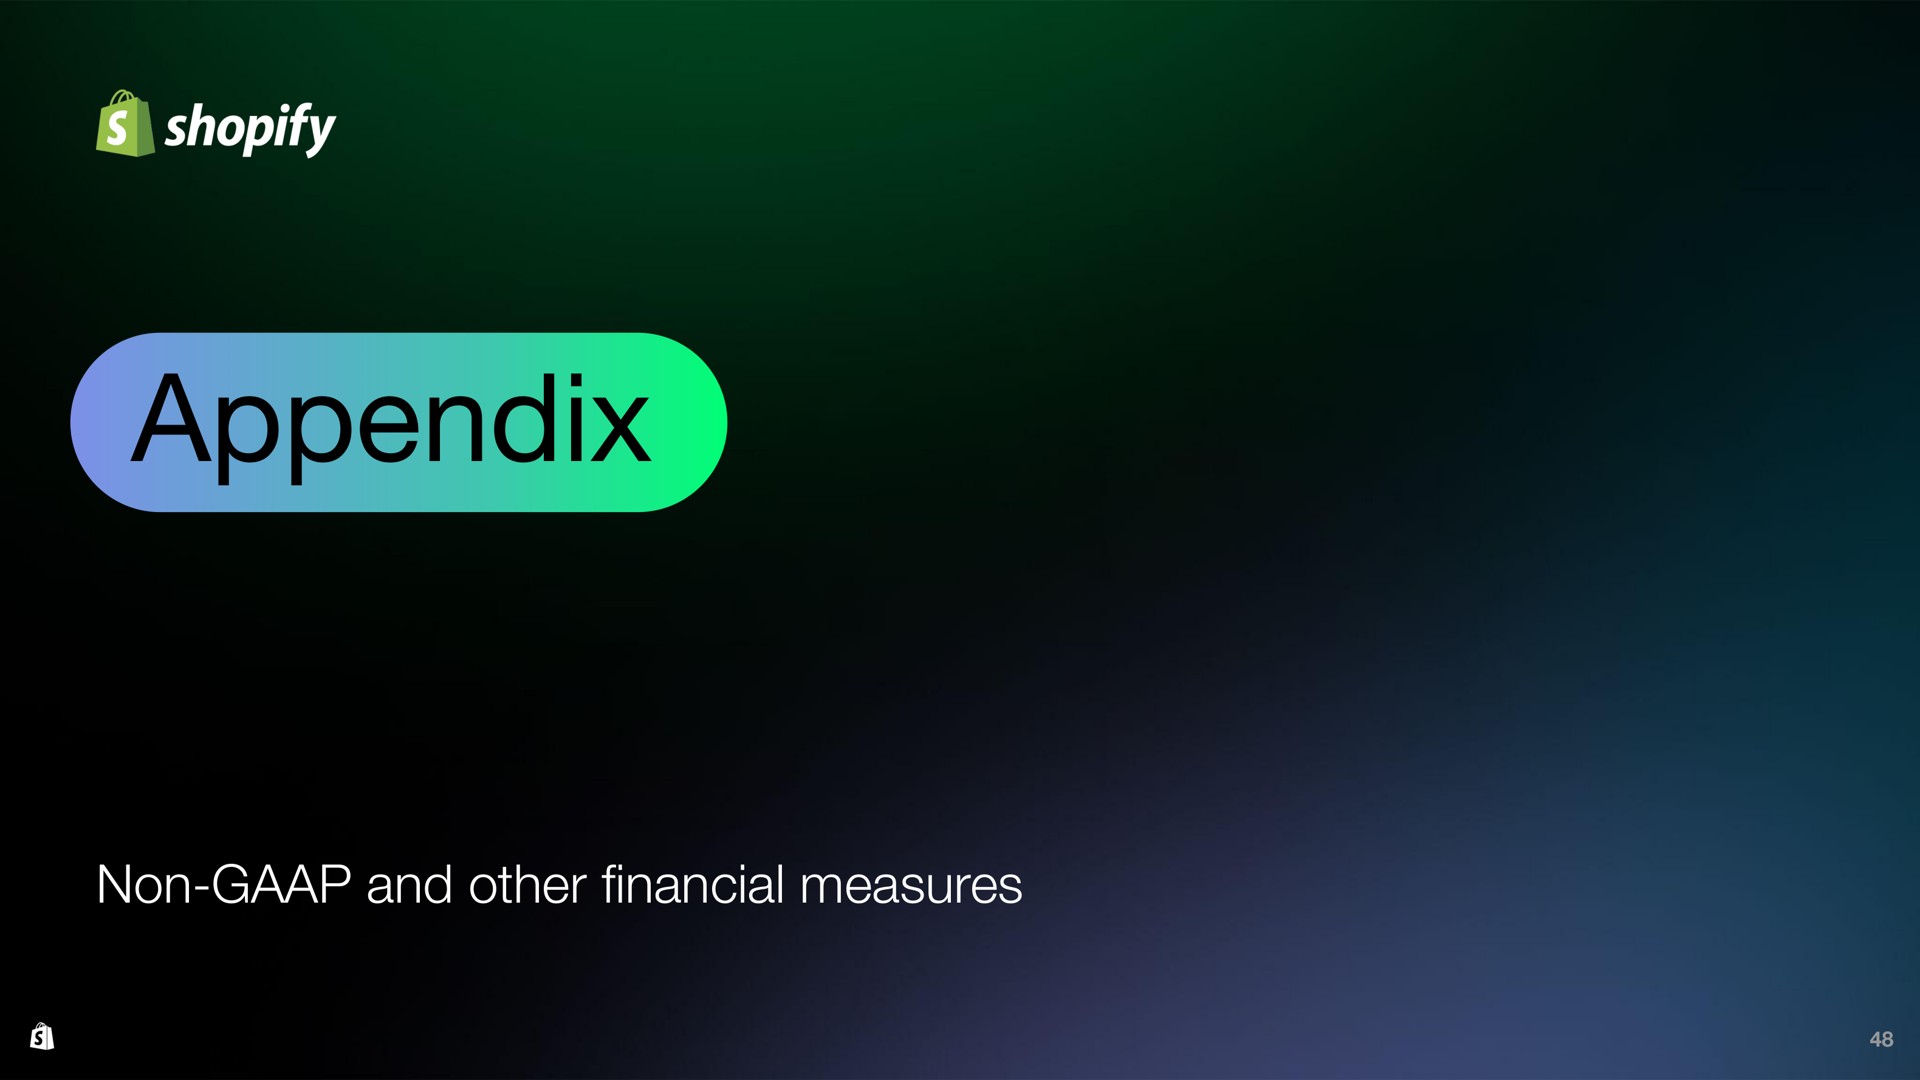 appendix non and other measures to financial | Shopify